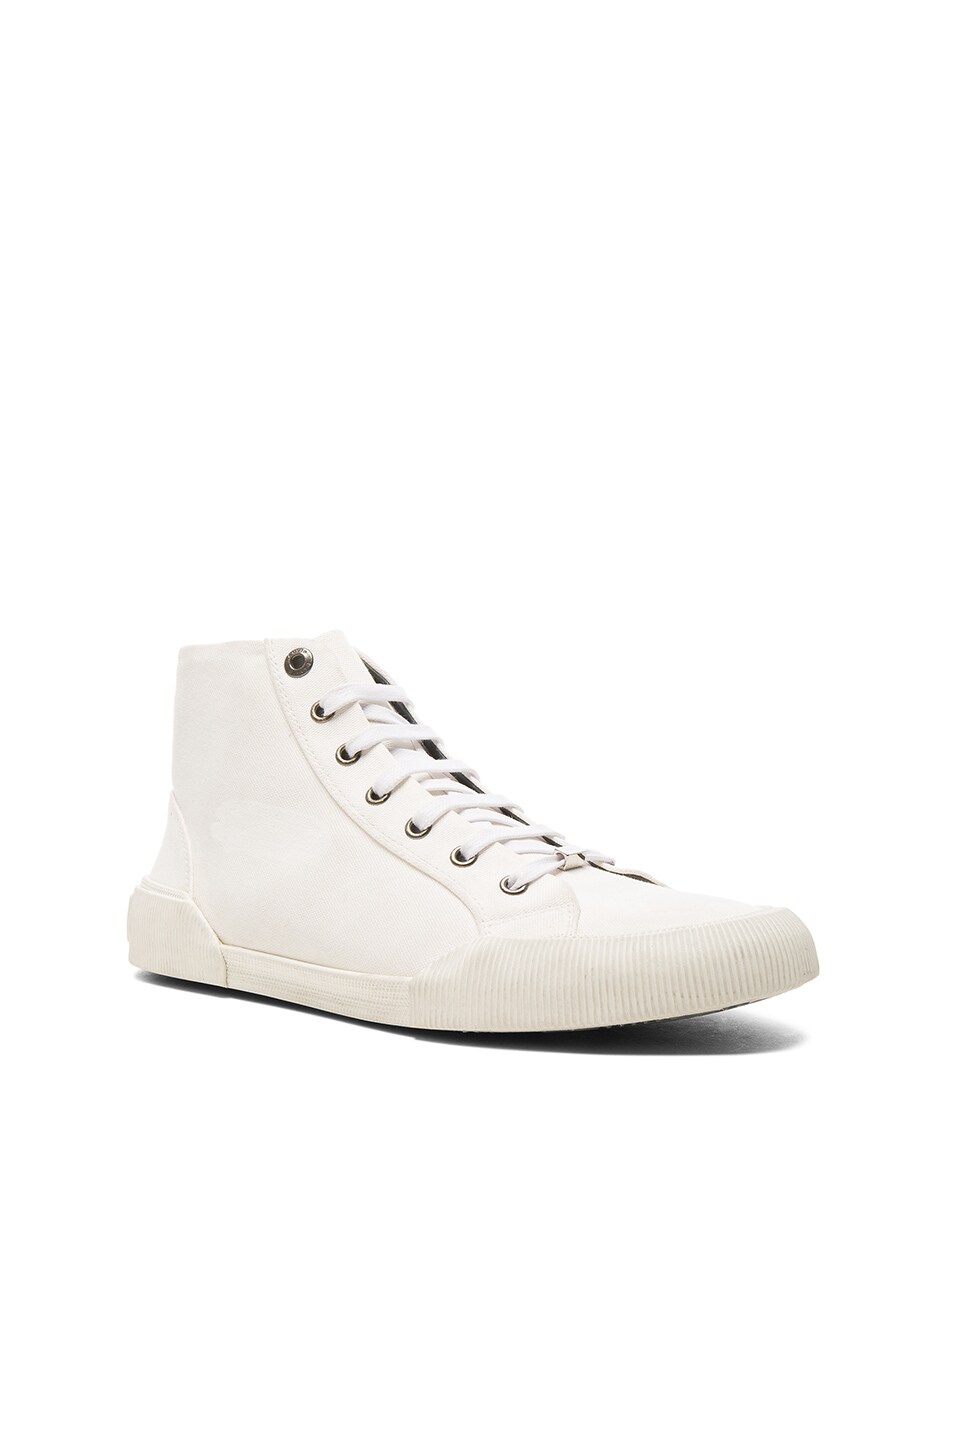 Image 1 of Lanvin Canvas Destroy Effect Mid-Top Sneakers in Optic White